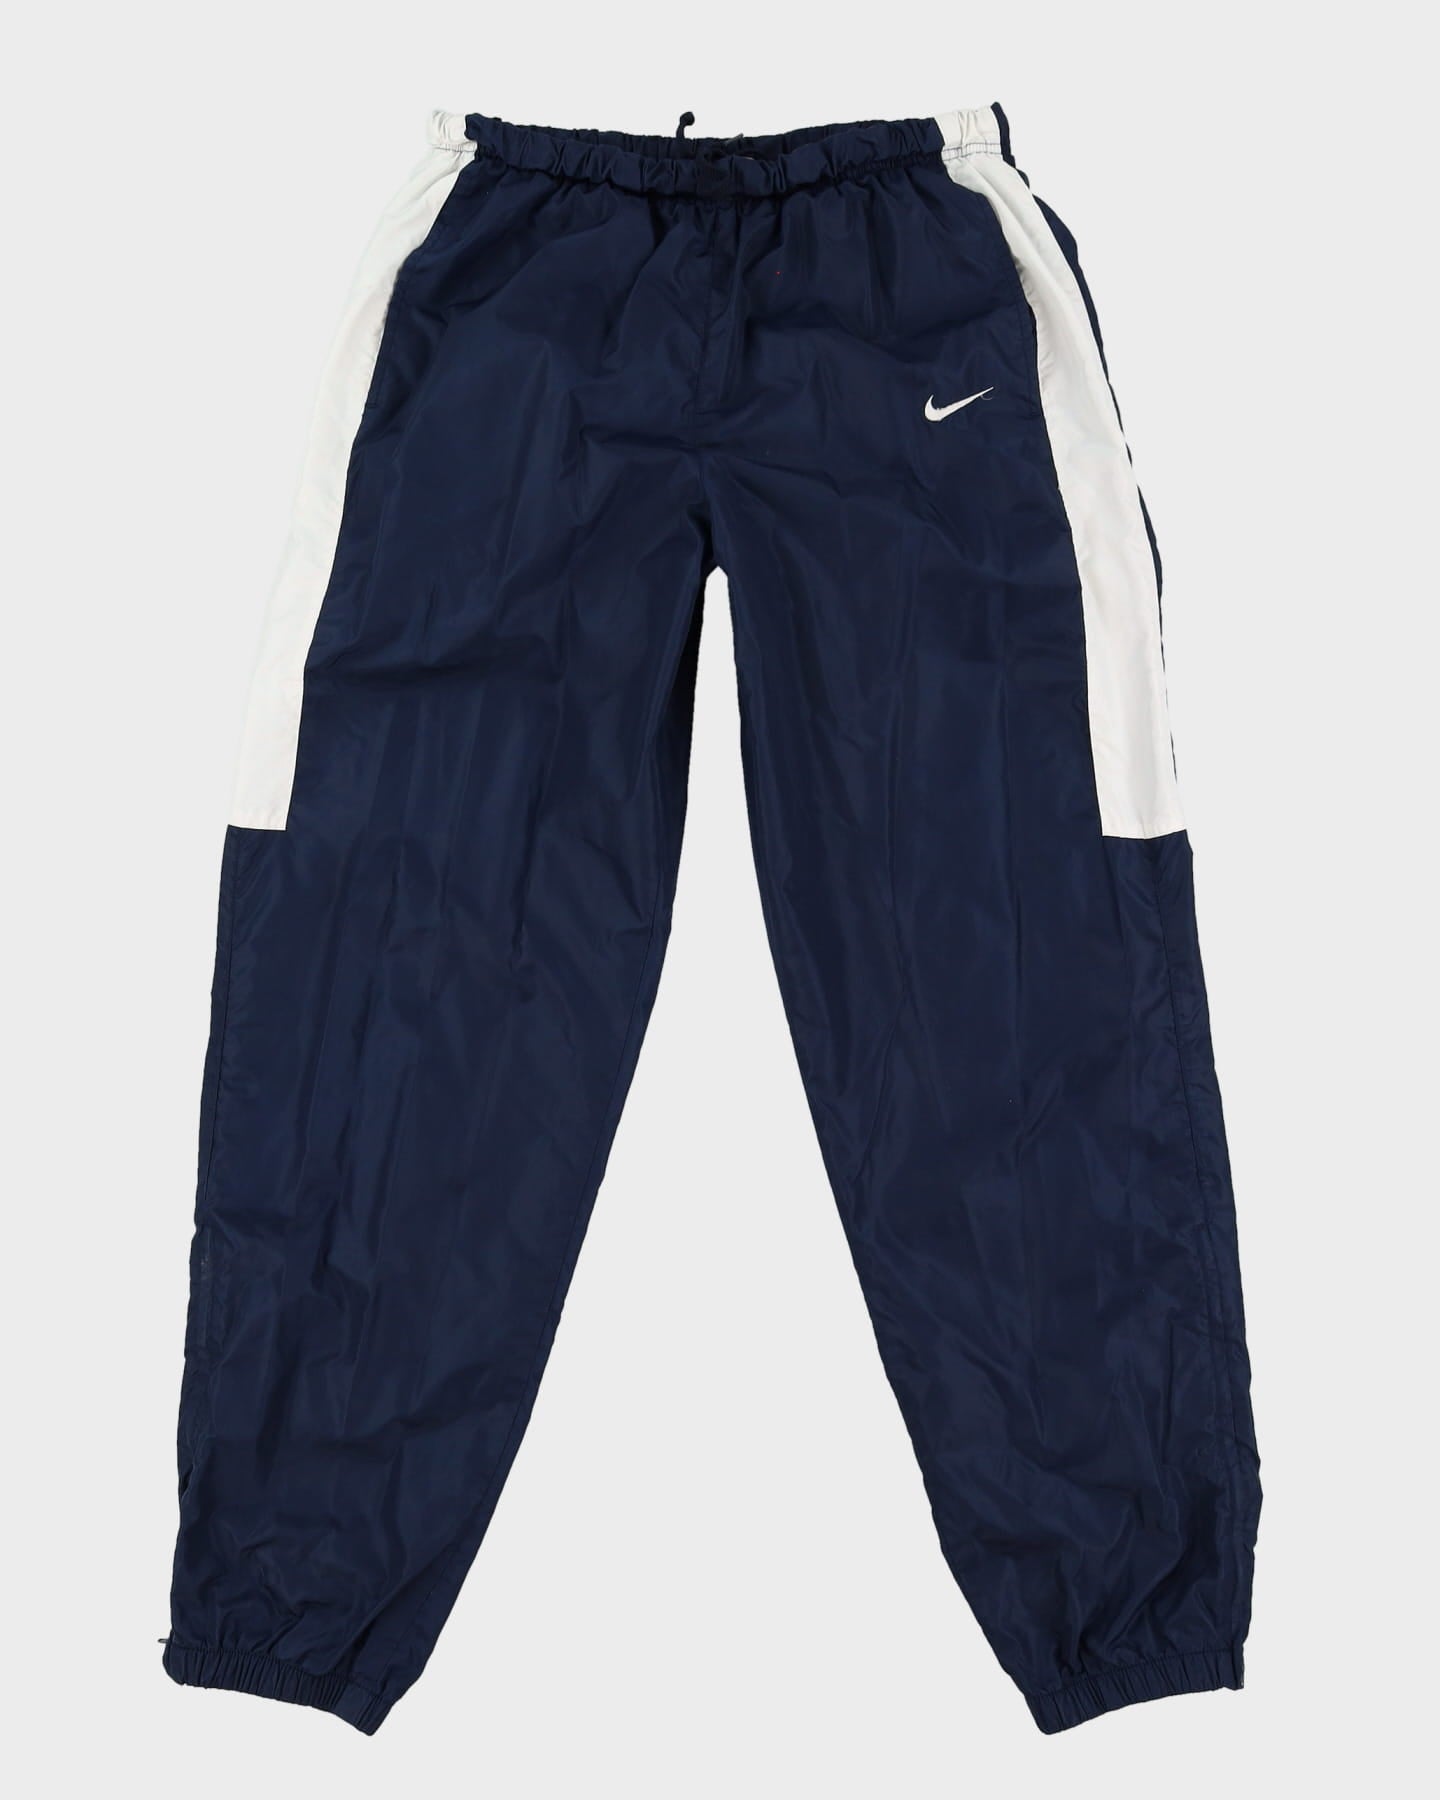 00s Nike Navy / White Shell Tracksuit Bottoms - Size Large W32